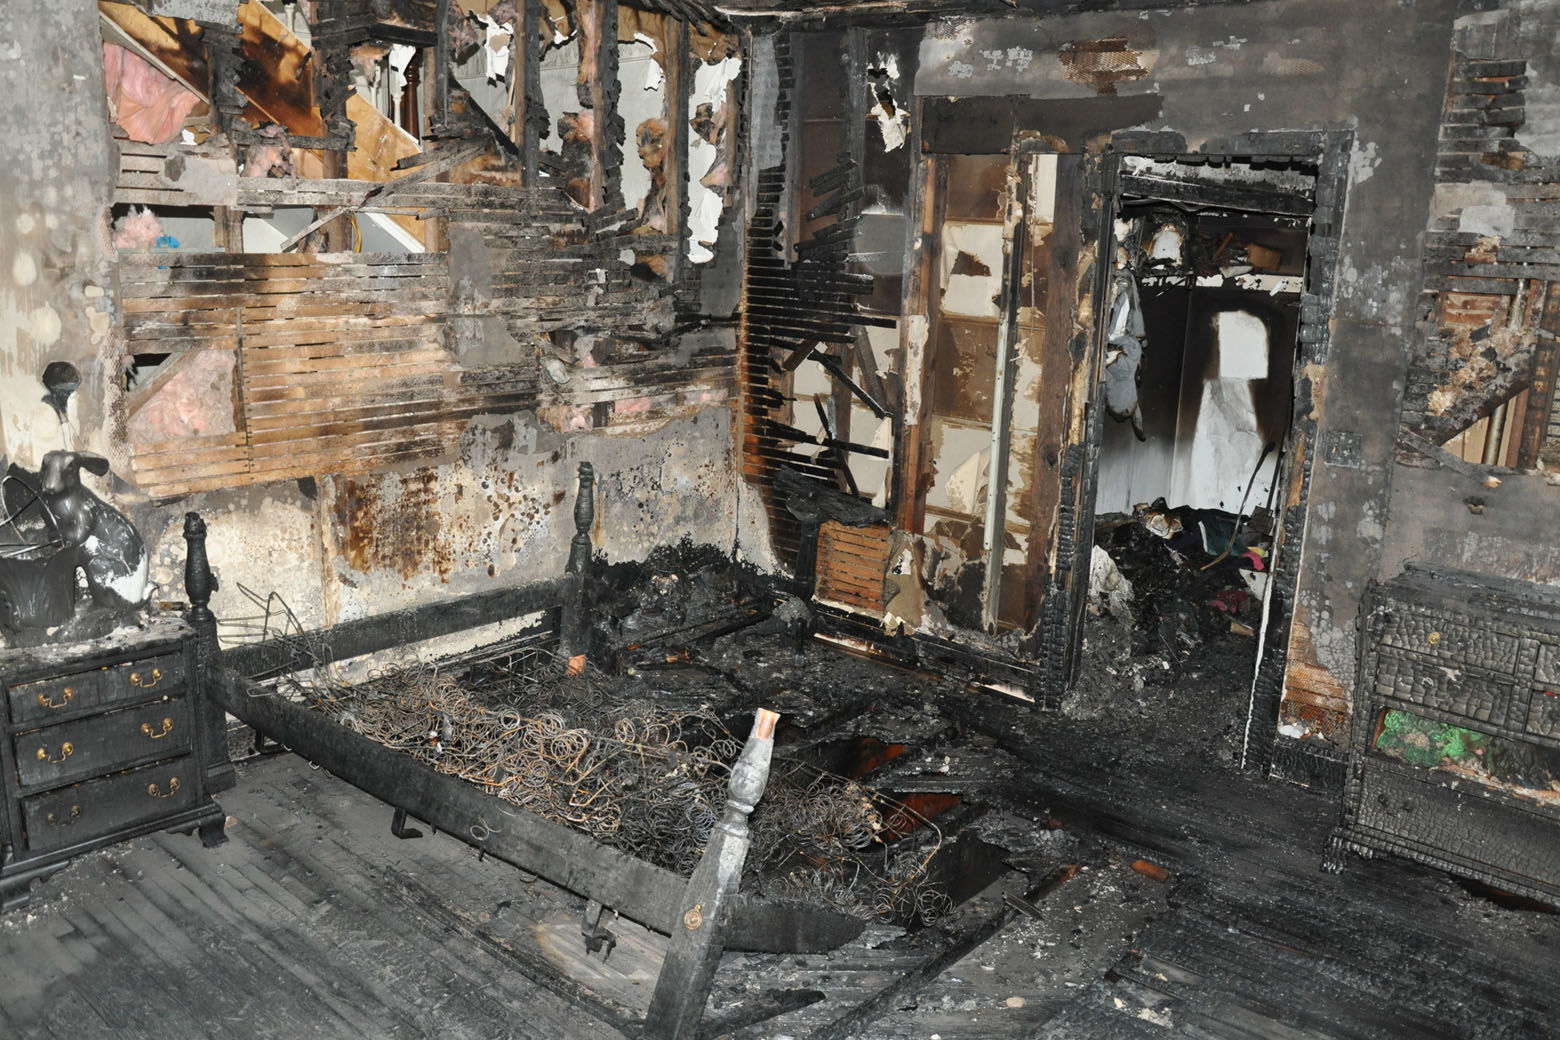 The burned-out upstairs bedroom where the body of 10-year-old Philip Savopoulos was found. The fire burned so hot, it burned through the floorboards. Fire investigators told the jury the fire started on the bed. (Courtesy U.S. Attorney's Office for D.C.)